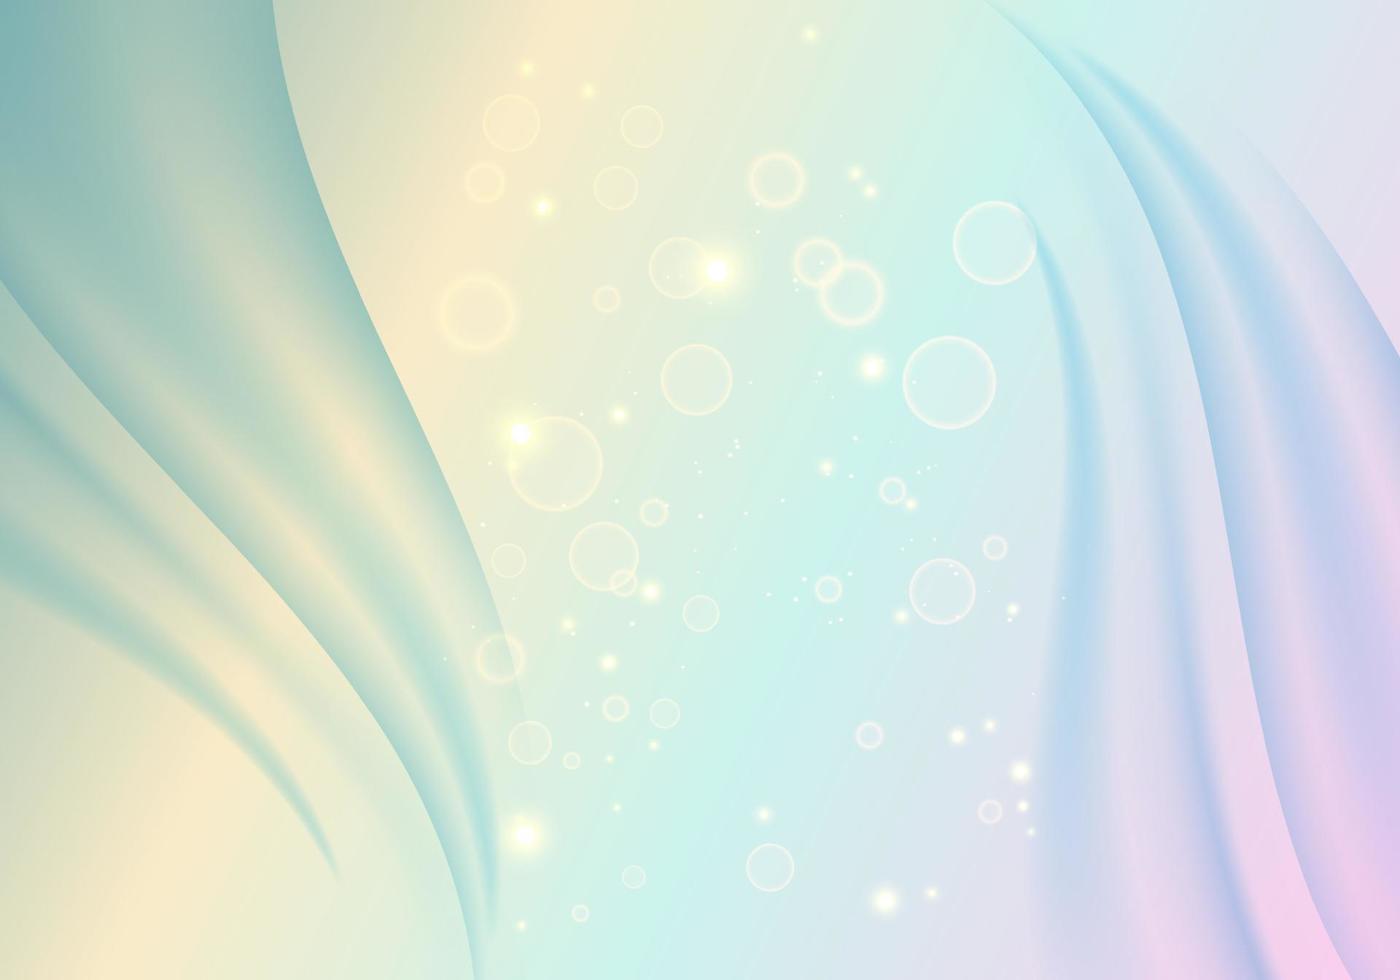 New design of pastel background with smooth wavy shapes vector